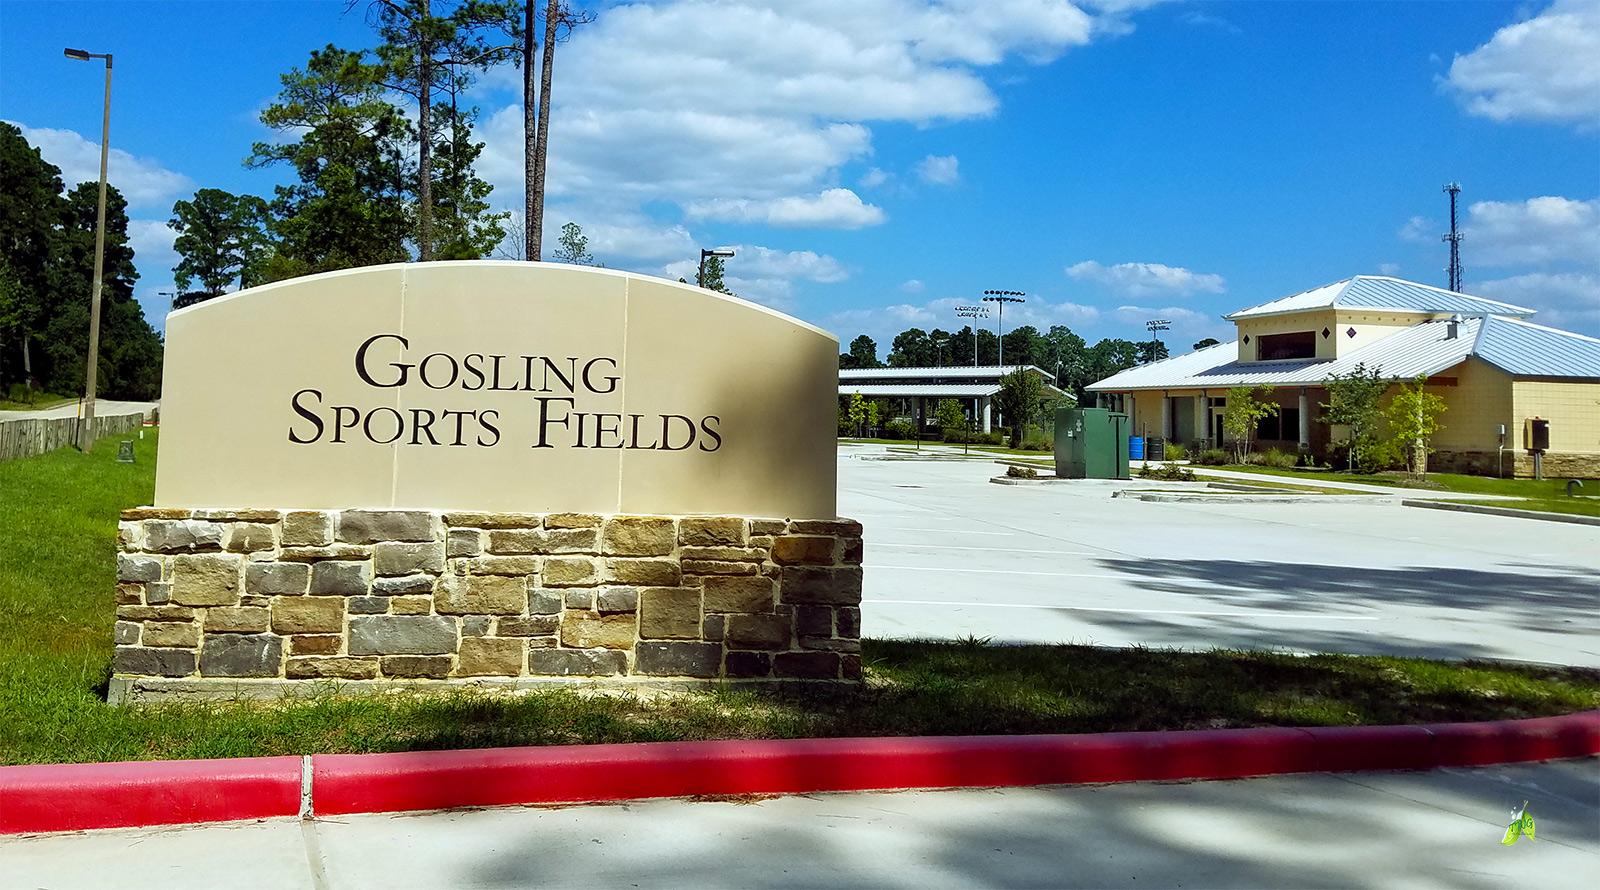 Gosling Sports Fields Marisco Place at Gosling Road